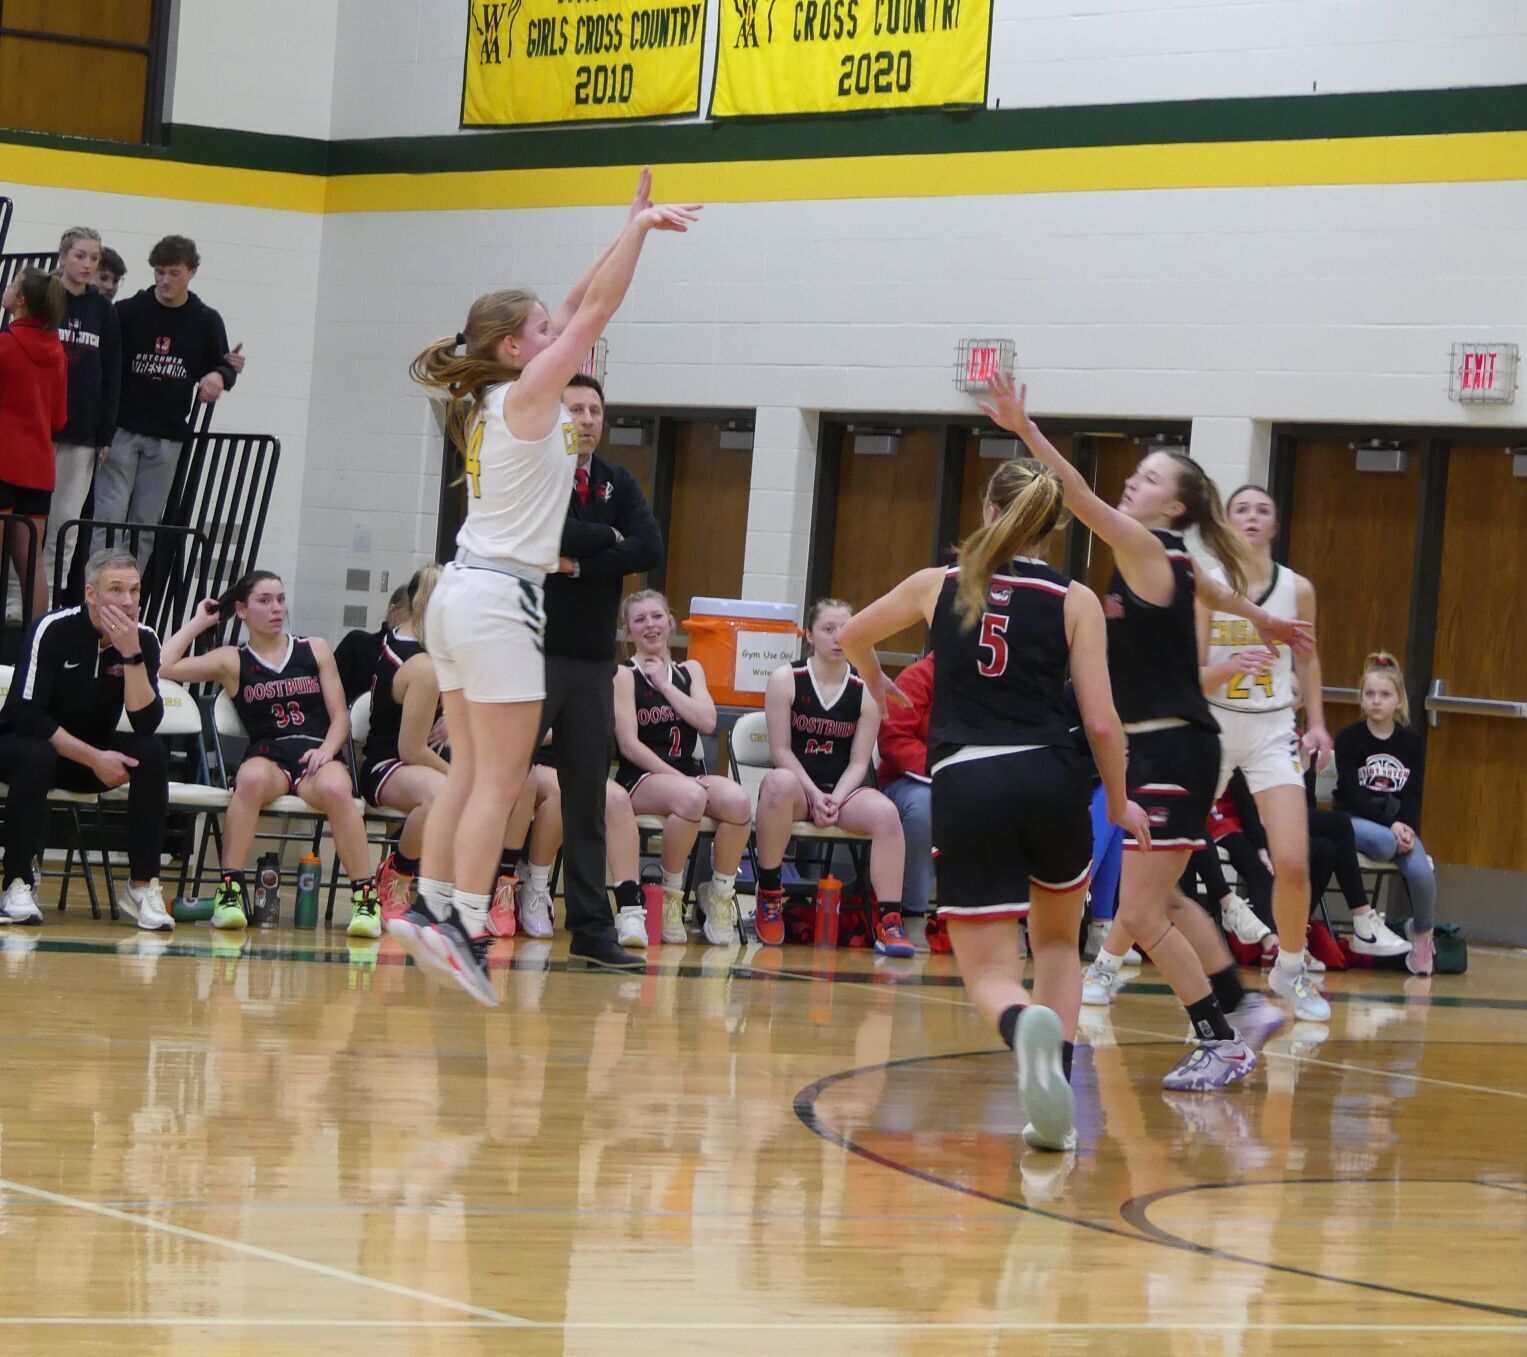 2023-24 Sheboygan Area High School Girls Basketball Season Preview: Team Outlook, Key Players, and Potential Success